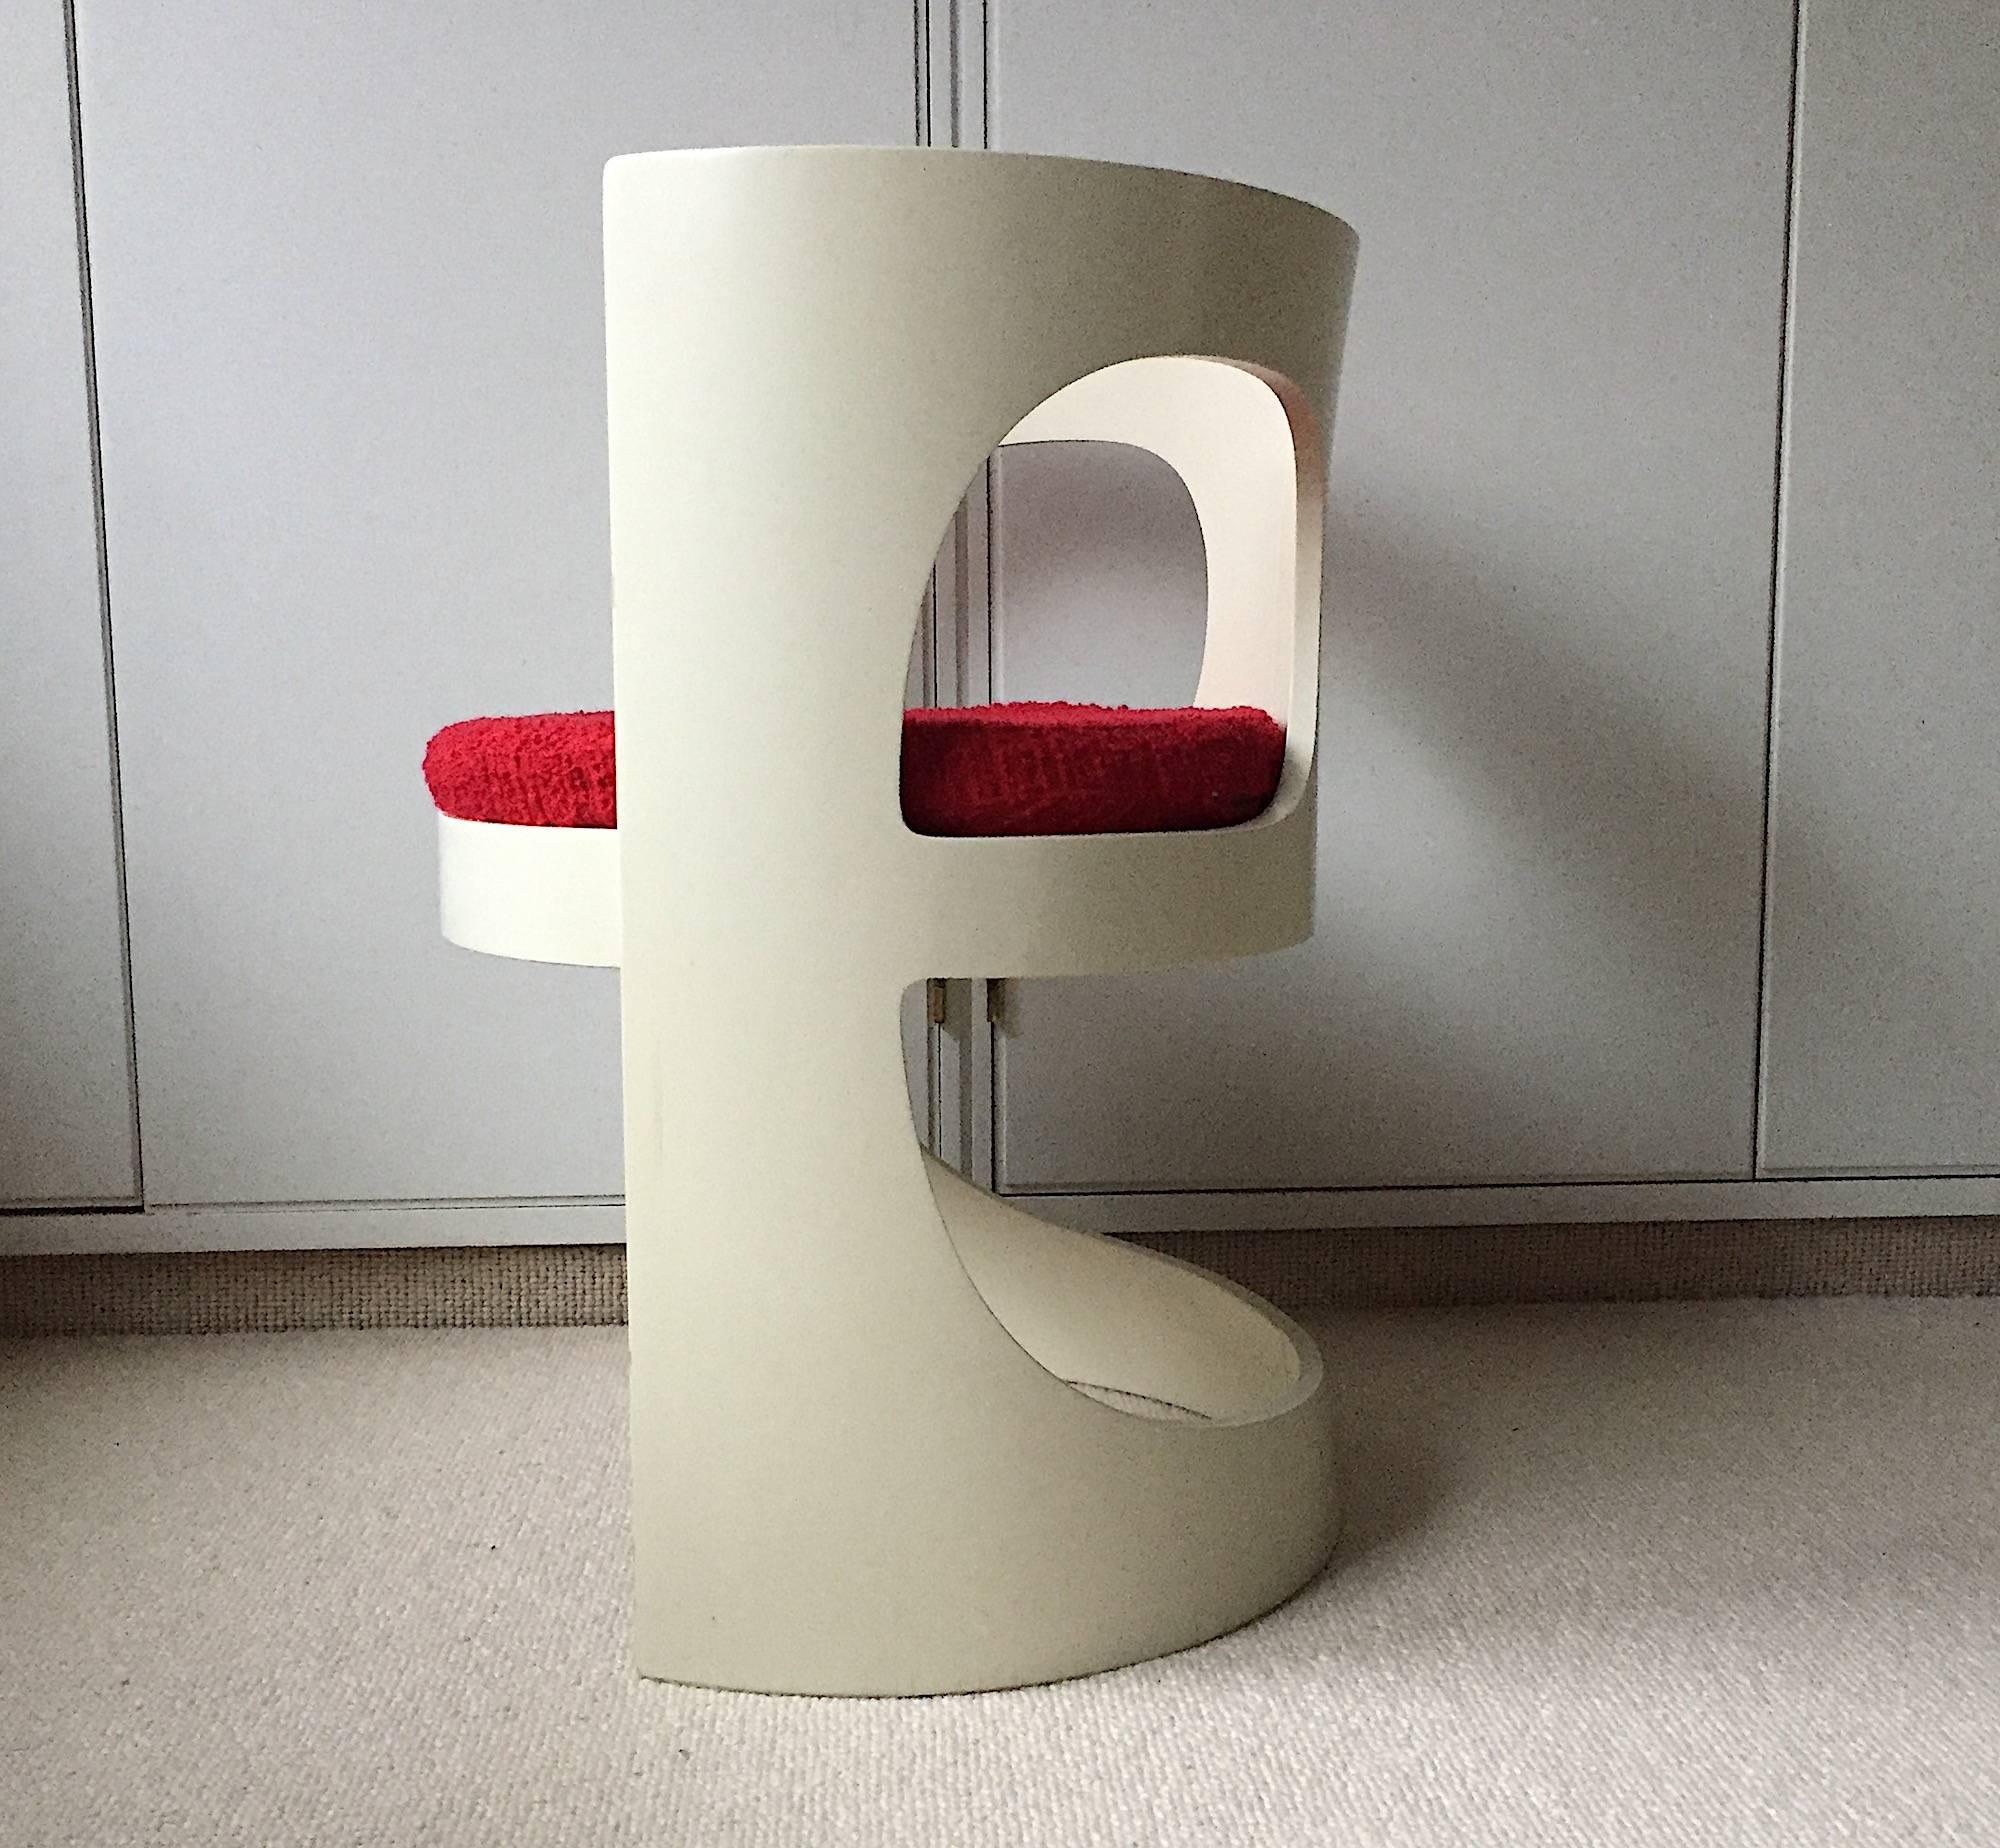 Arne Jacobsen, (1902-1971) Denmark.

Very nice white birch plywood chair from Arne Jacobsen designed 1968. With red wool cushion. Made by: Asko Oy, Lahti, Finland. 

The Pre PoP model has not been re-issued or copied to our knowledge and would